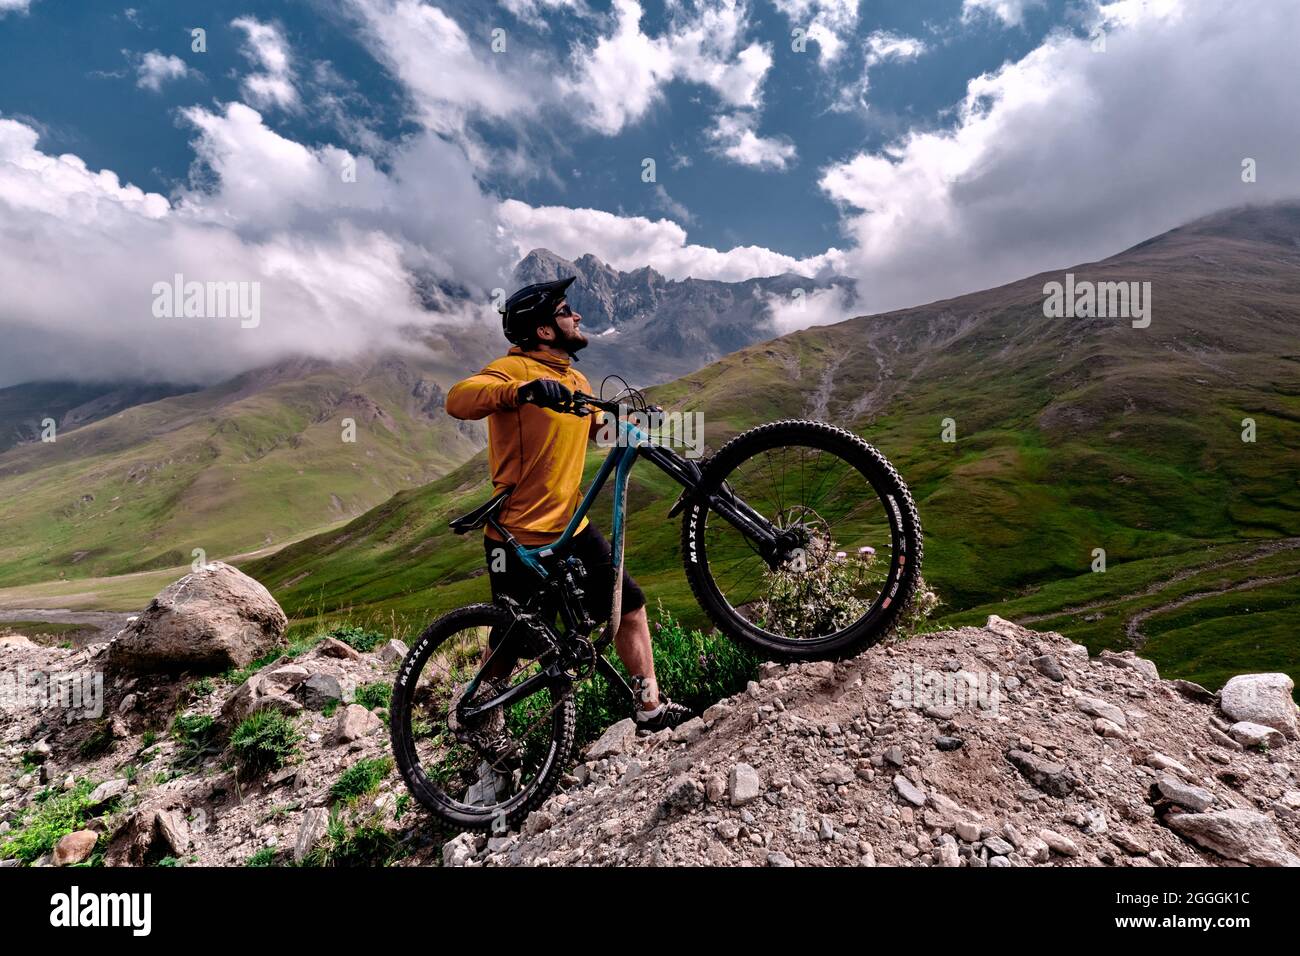 Elbrus, Kabardino-Balkaria, Russia - August 2017: Mountain biking in Elbrus. Cyclist on the top of a hill and enjoying view of the mountains. MTB bicy Stock Photo